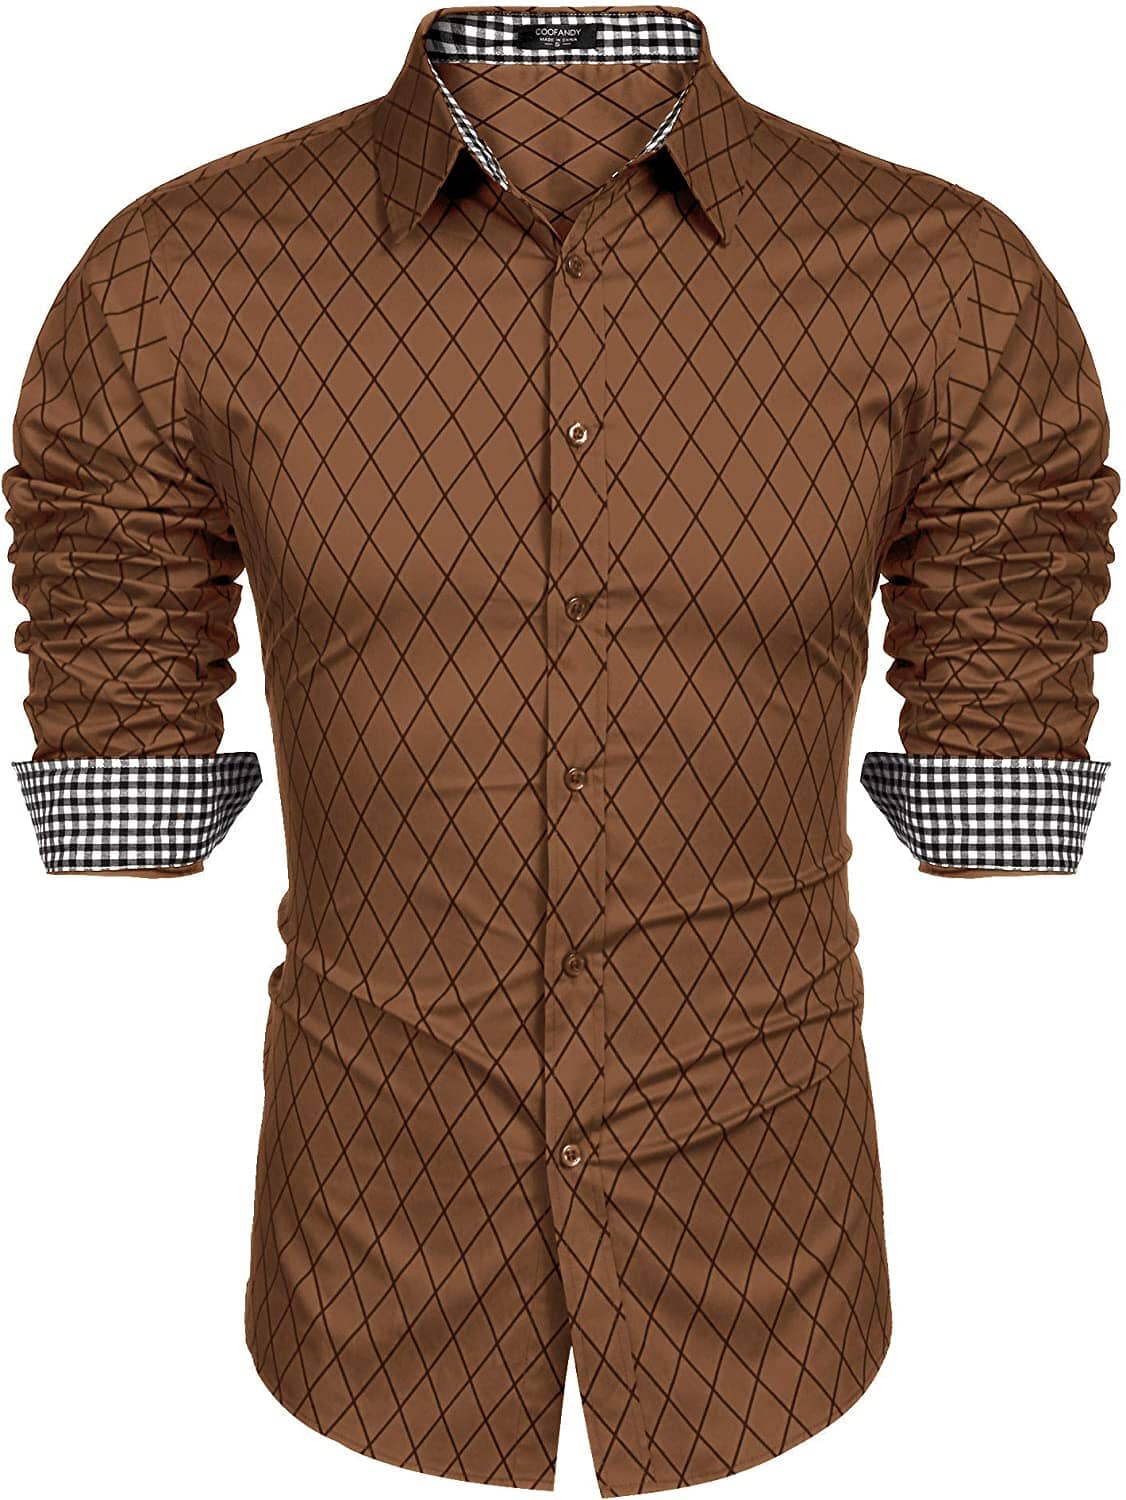 Business Long Sleeve Slim Fit Dress Shirt (US Only) Shirts COOFANDY Store Brown S 